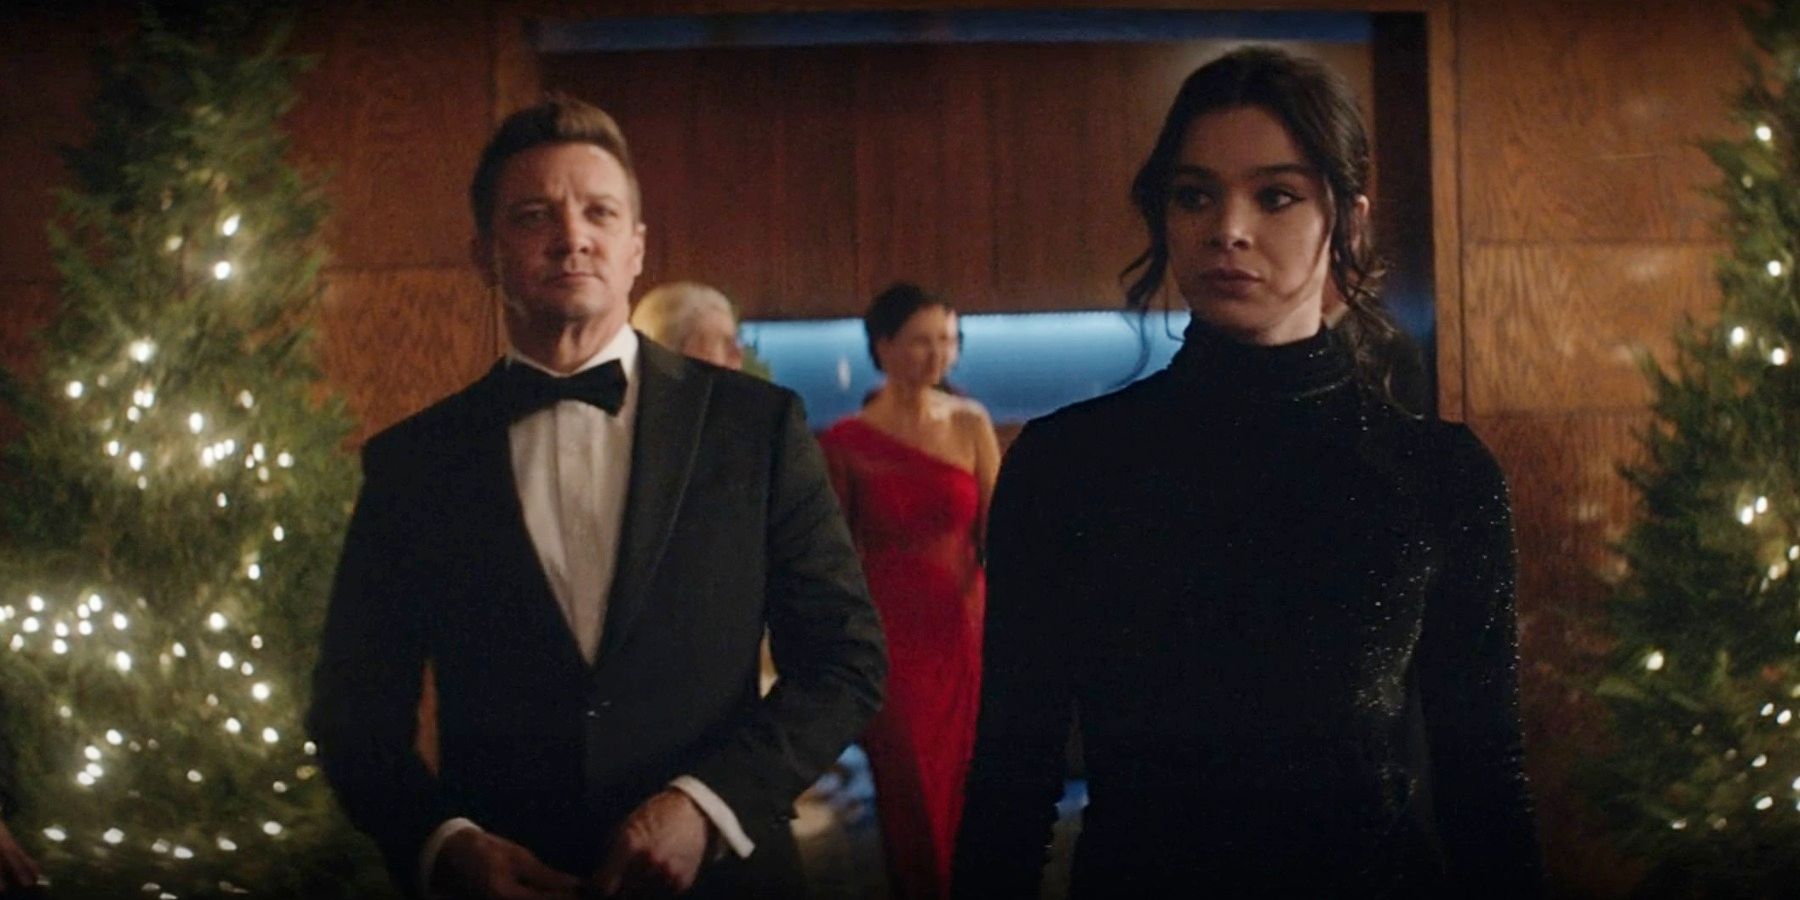 Clint Barton and Kate Bishop formal wear Hawkeye Christmas party